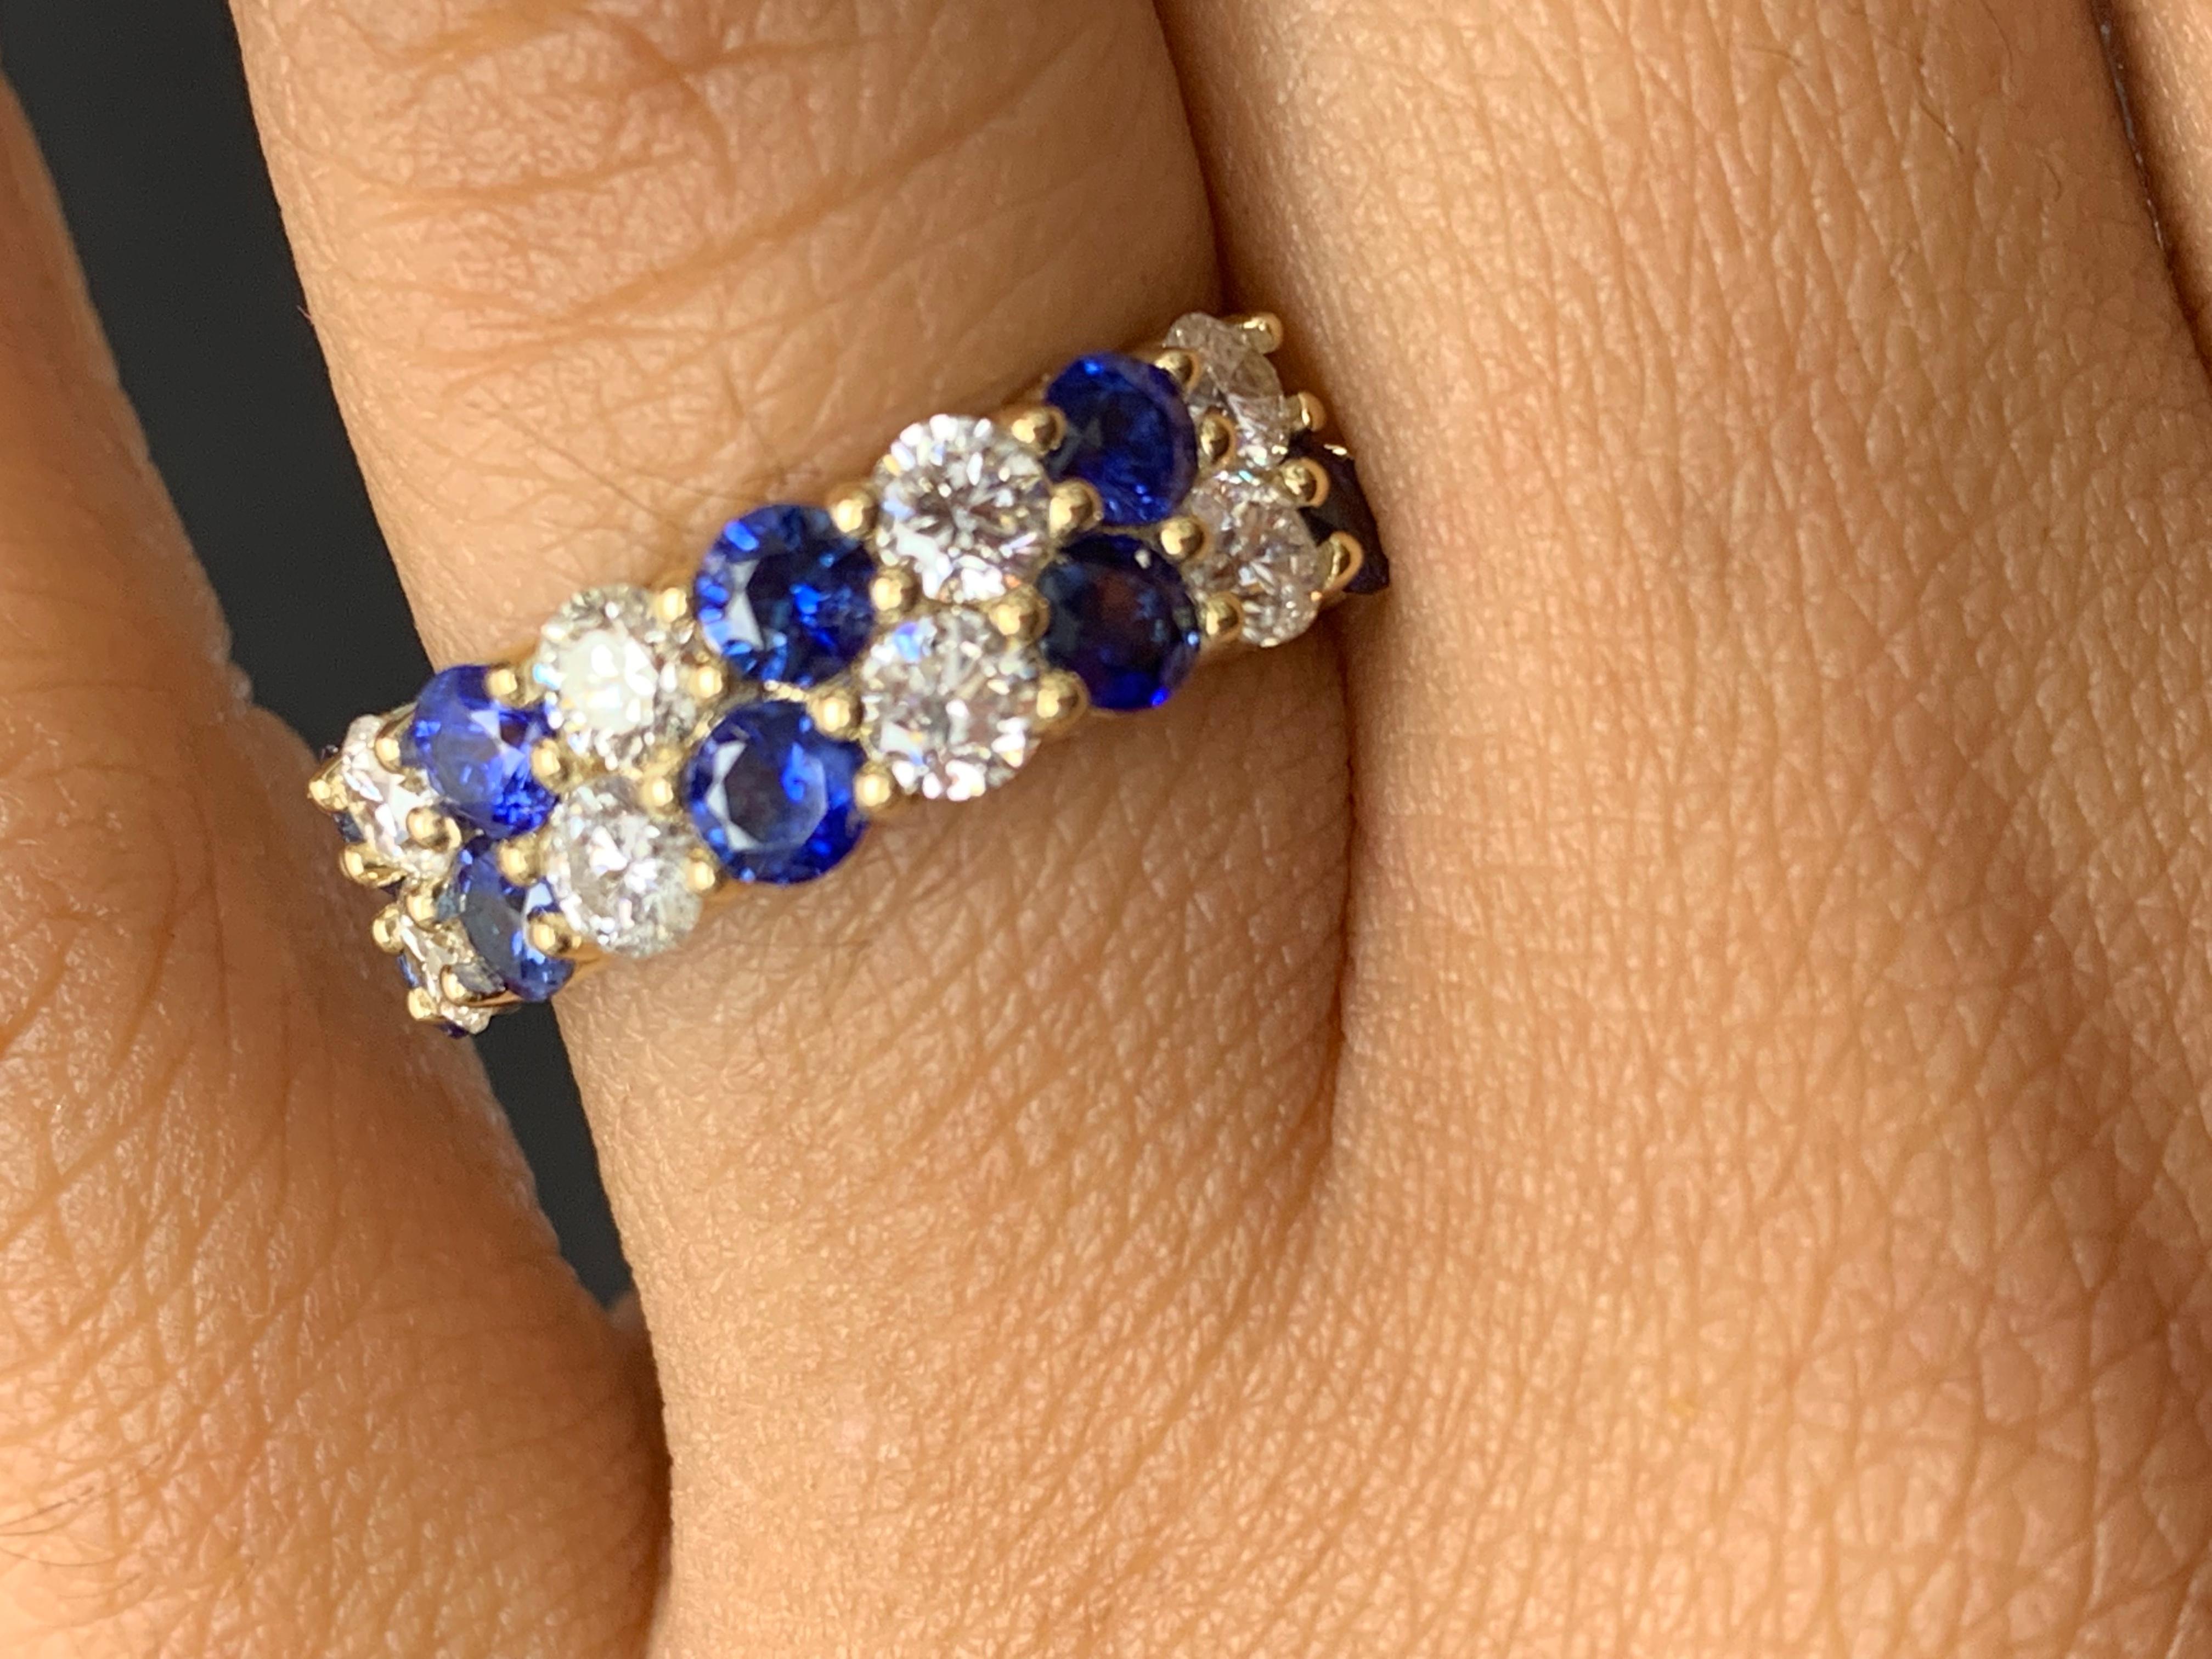 A unique and fashionable ZicZac ring showcasing two rows of round-shape 10 blue sapphires and 9 diamonds, set in a band design. Rubies weigh 1.50 carats and Diamonds weigh 1.52 carats total. A brilliant and masterfully-made piece.

Style available